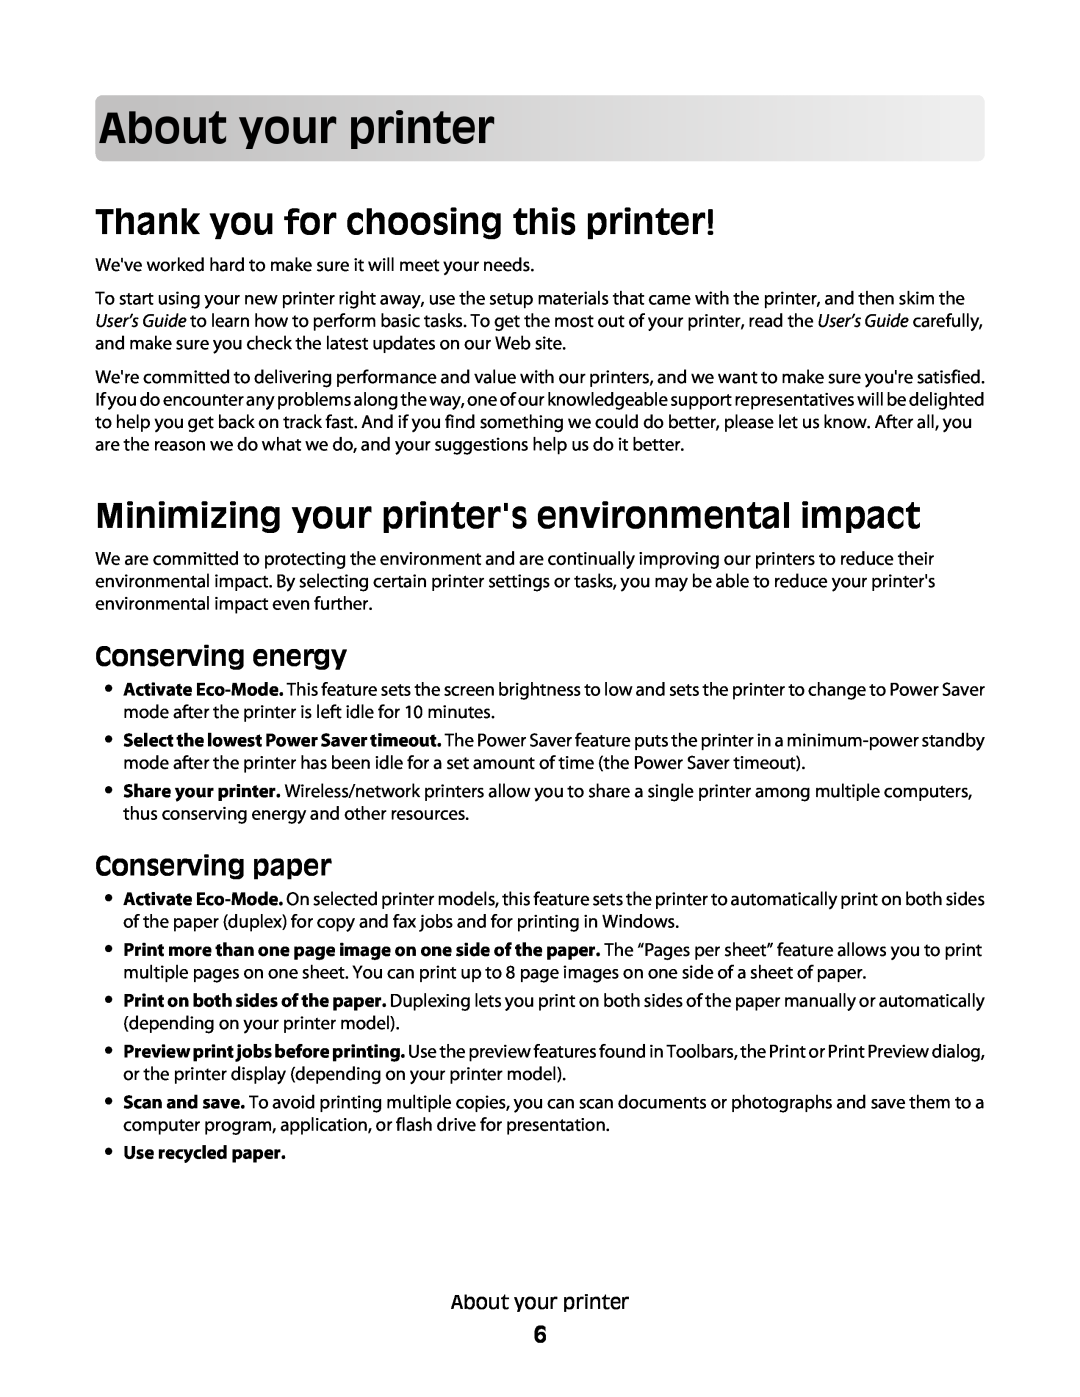 Lexmark S500, 30E About your printer, Thank you for choosing this printer, Minimizing your printers environmental impact 